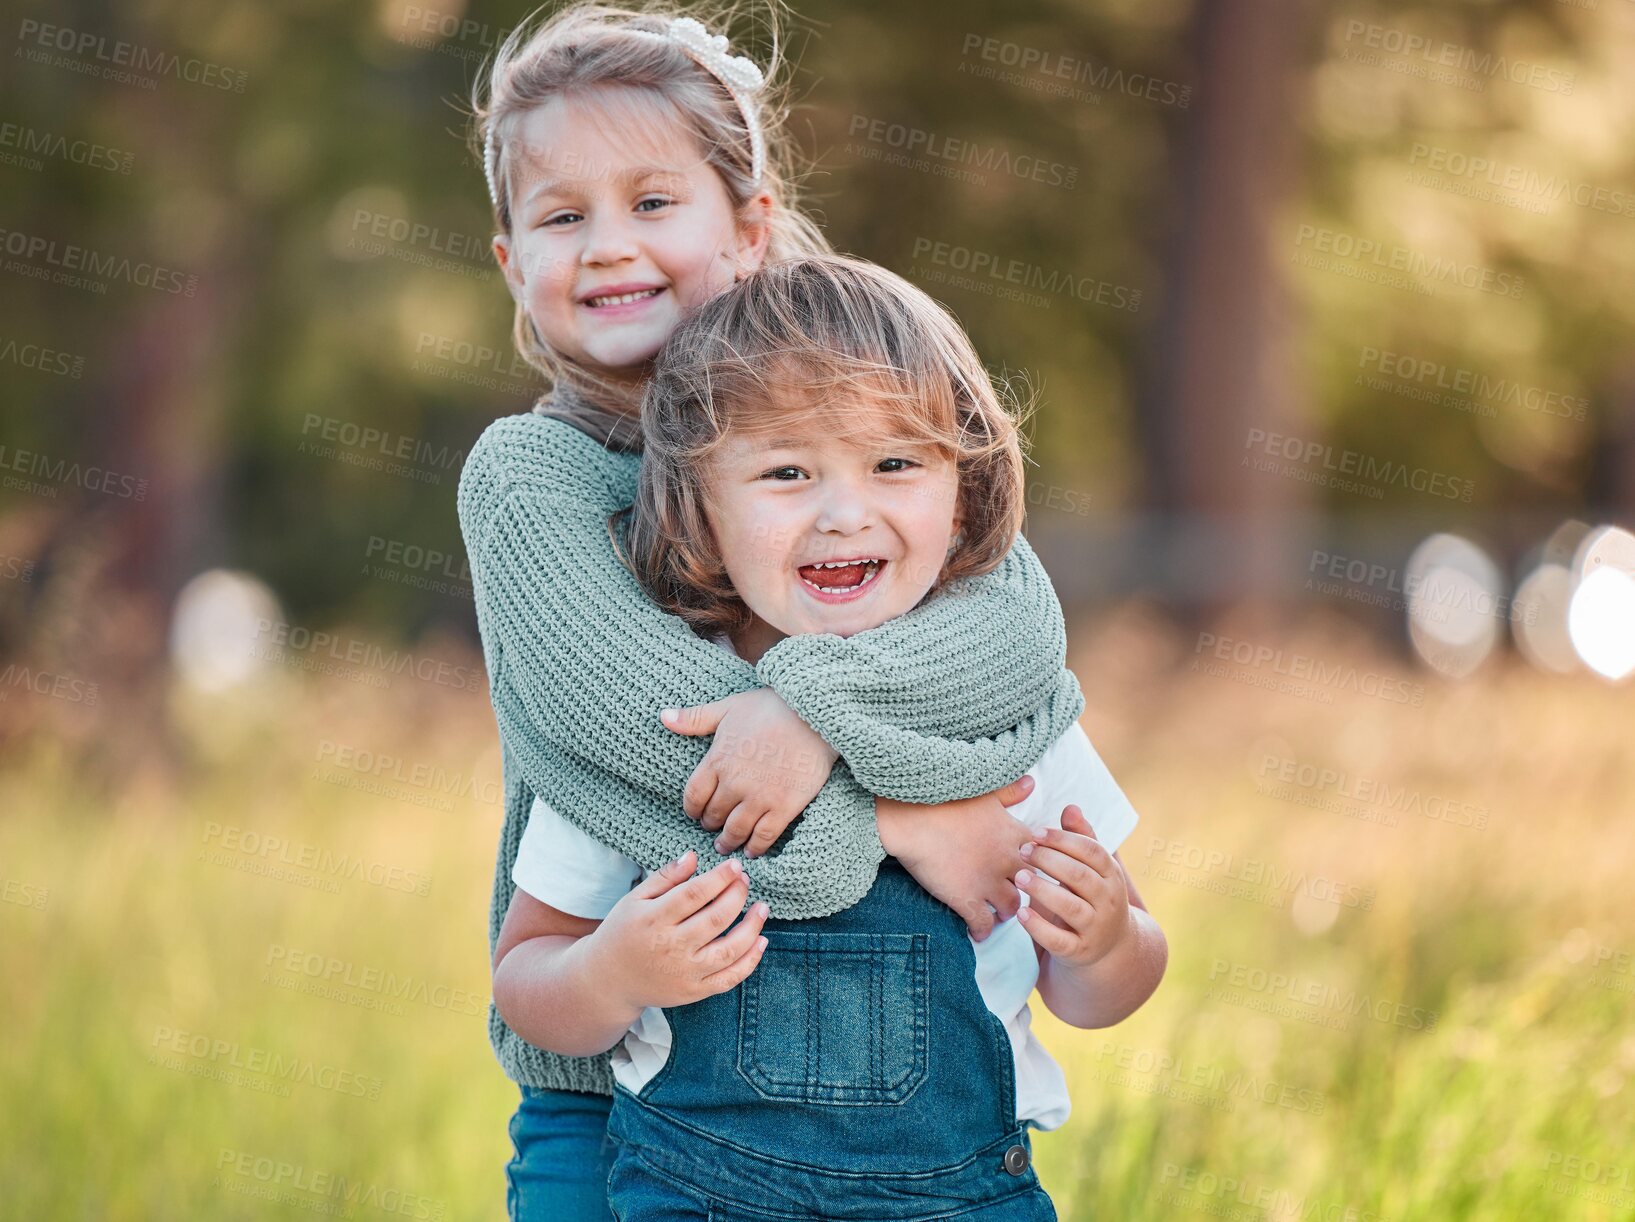 Buy stock photo Shot of an adorable little girl and her smaller brother standing outside